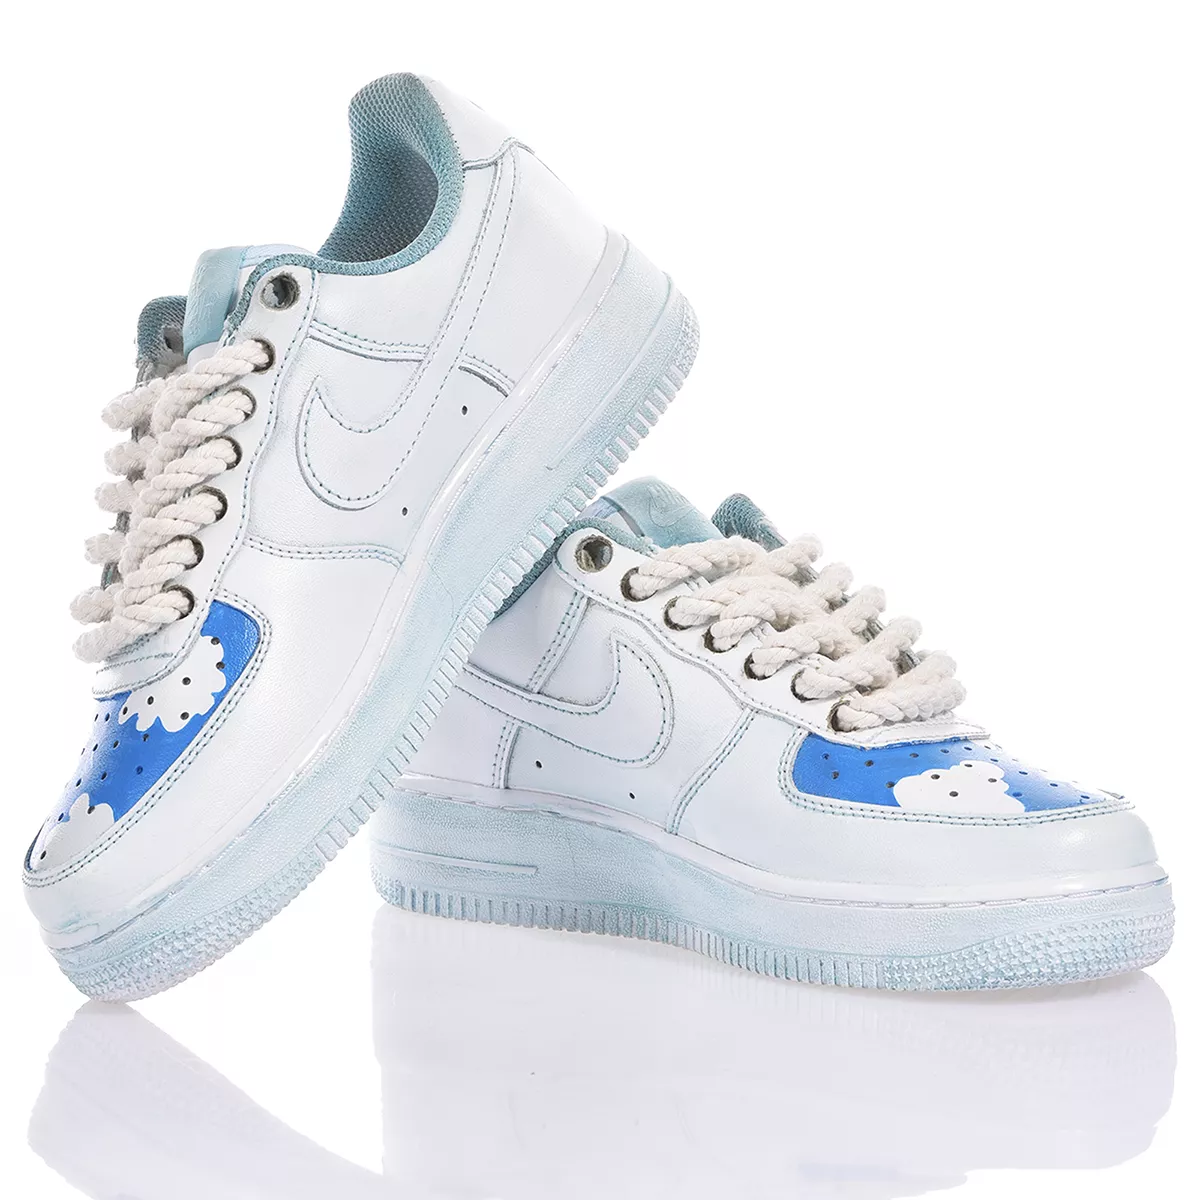 Nike Air Force 1 Testa di Chezzo Air Force 1 Used-Waschung